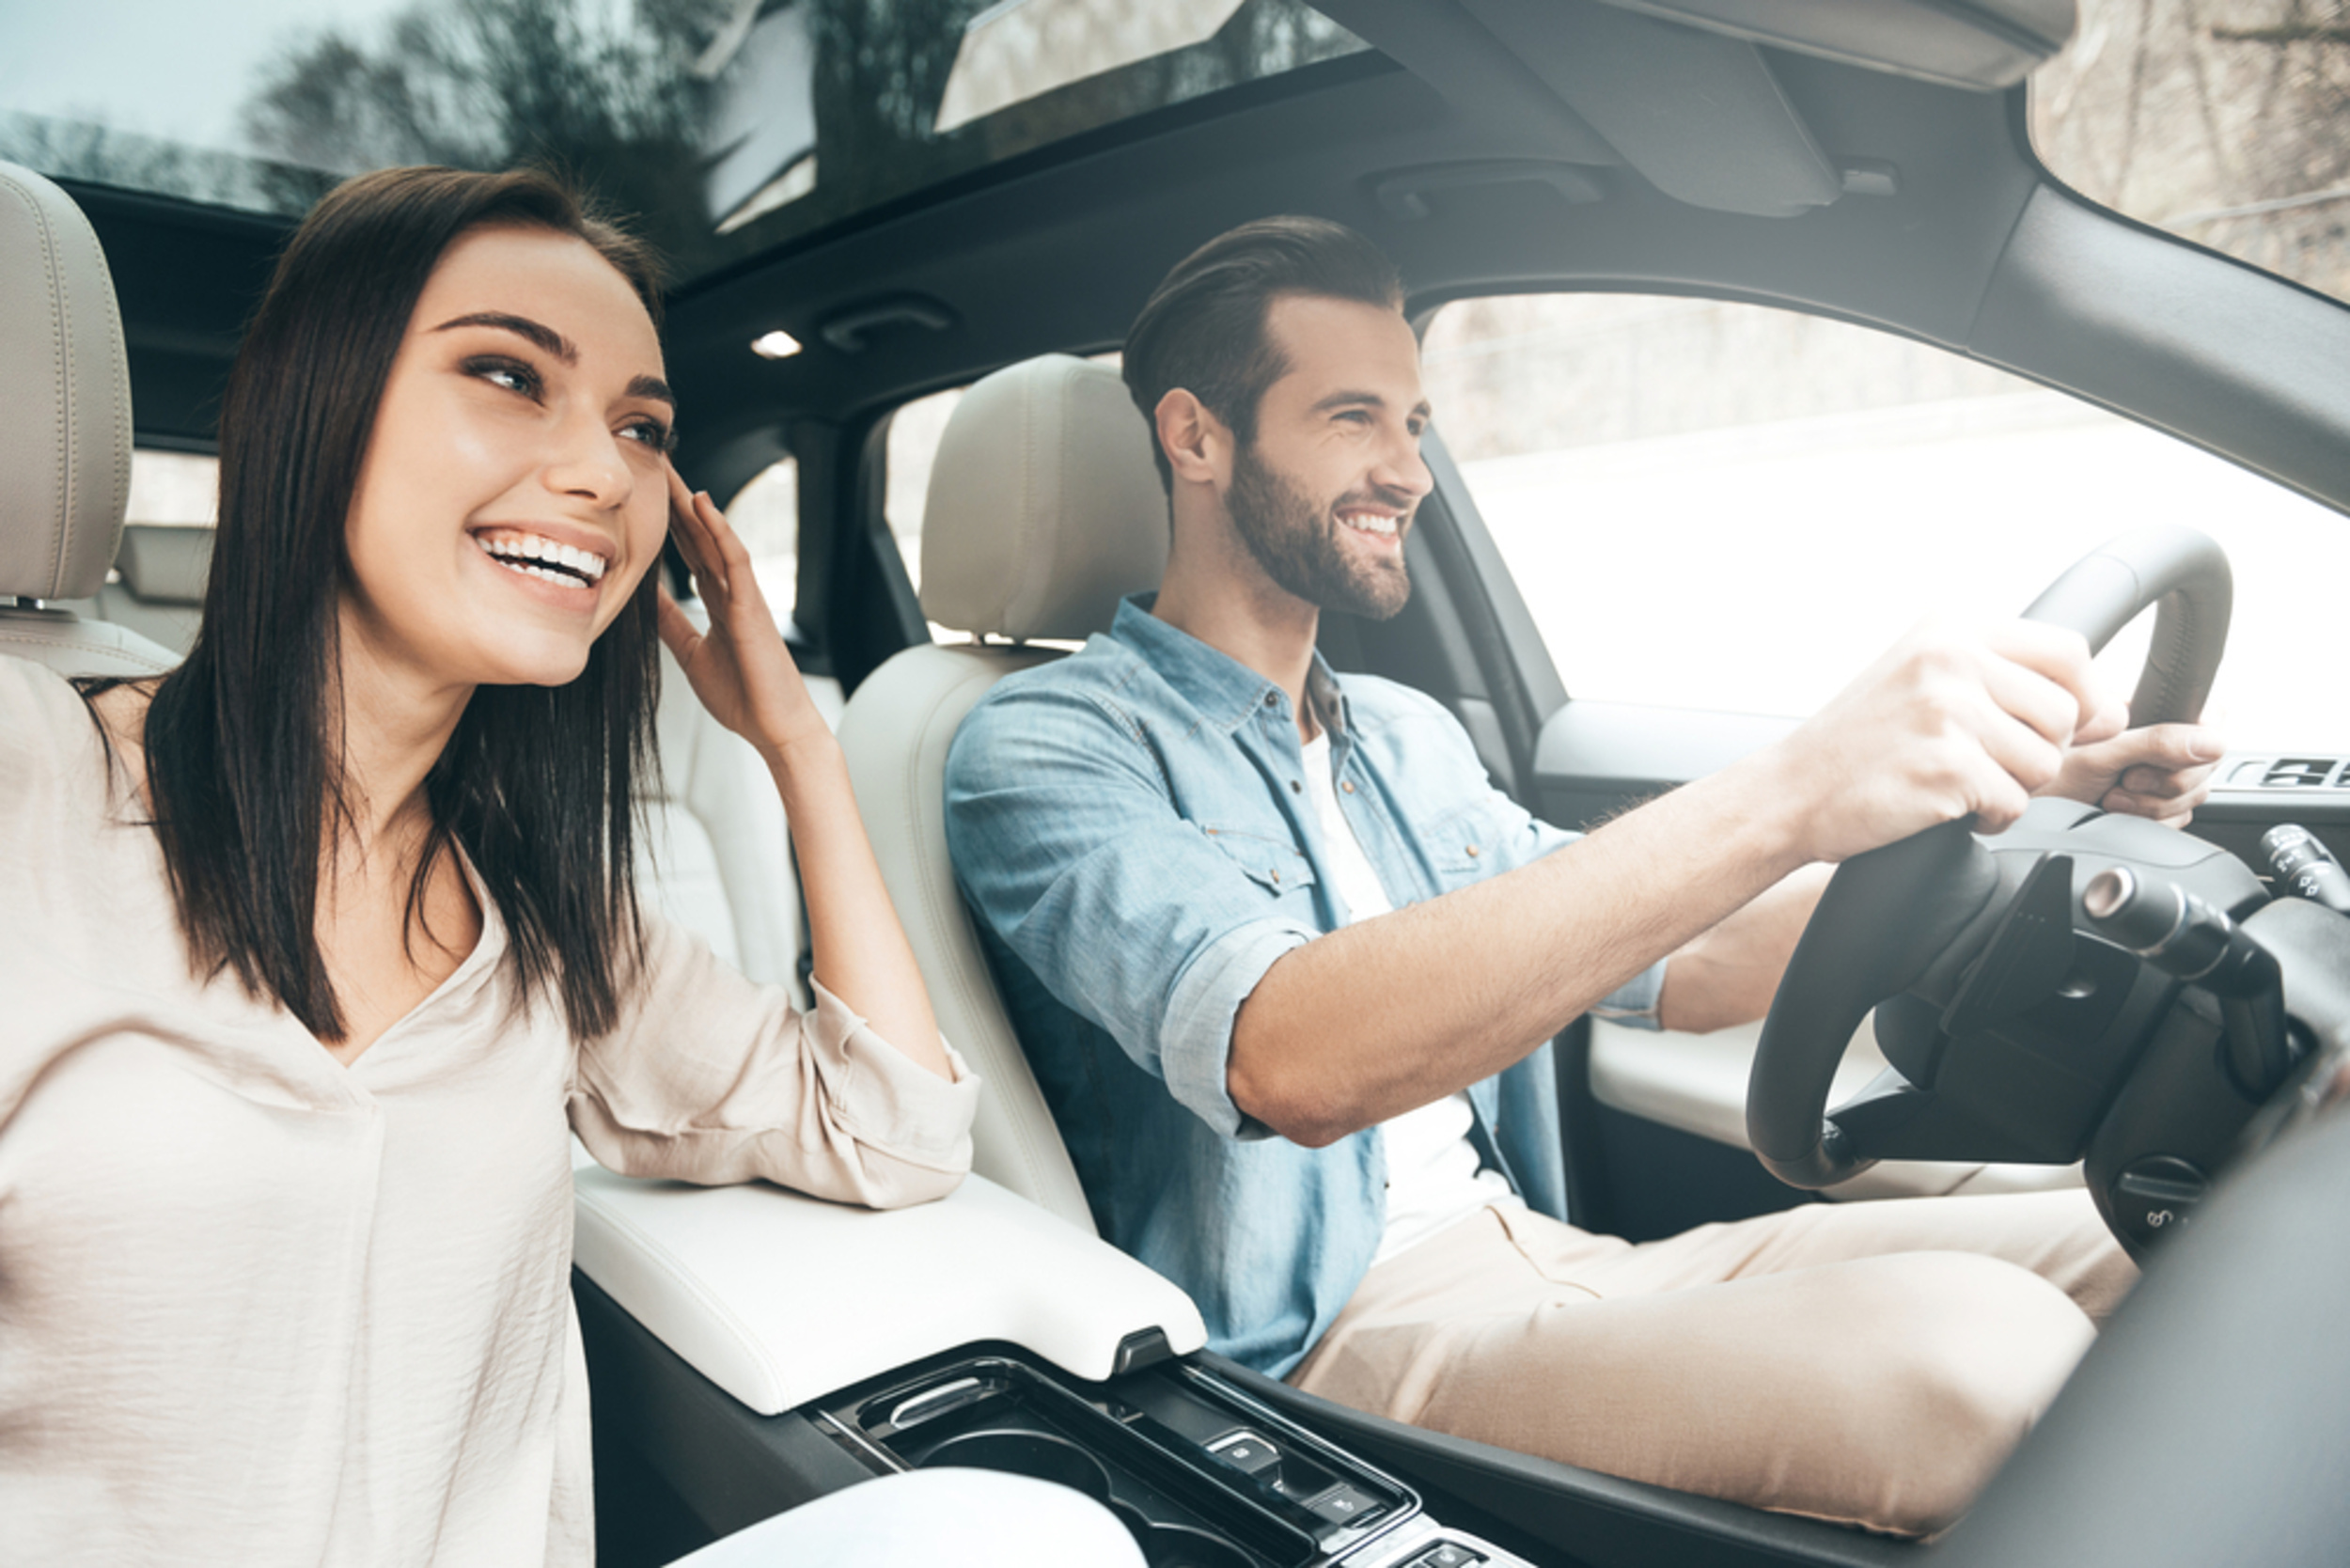 <p>If you're driving with other adults who have driver's licenses, make sure that you're splitting up the time fairly. Driving while extremely tired can be dangerous, and it will just make the trip more enjoyable if everyone capable is sharing the load. </p><p><a href='https://www.msn.com/en-us/community/channel/vid-cj9pqbr0vn9in2b6ddcd8sfgpfq6x6utp44fssrv6mc2gtybw0us'>Follow us on MSN to see more of our exclusive lifestyle content.</a></p>